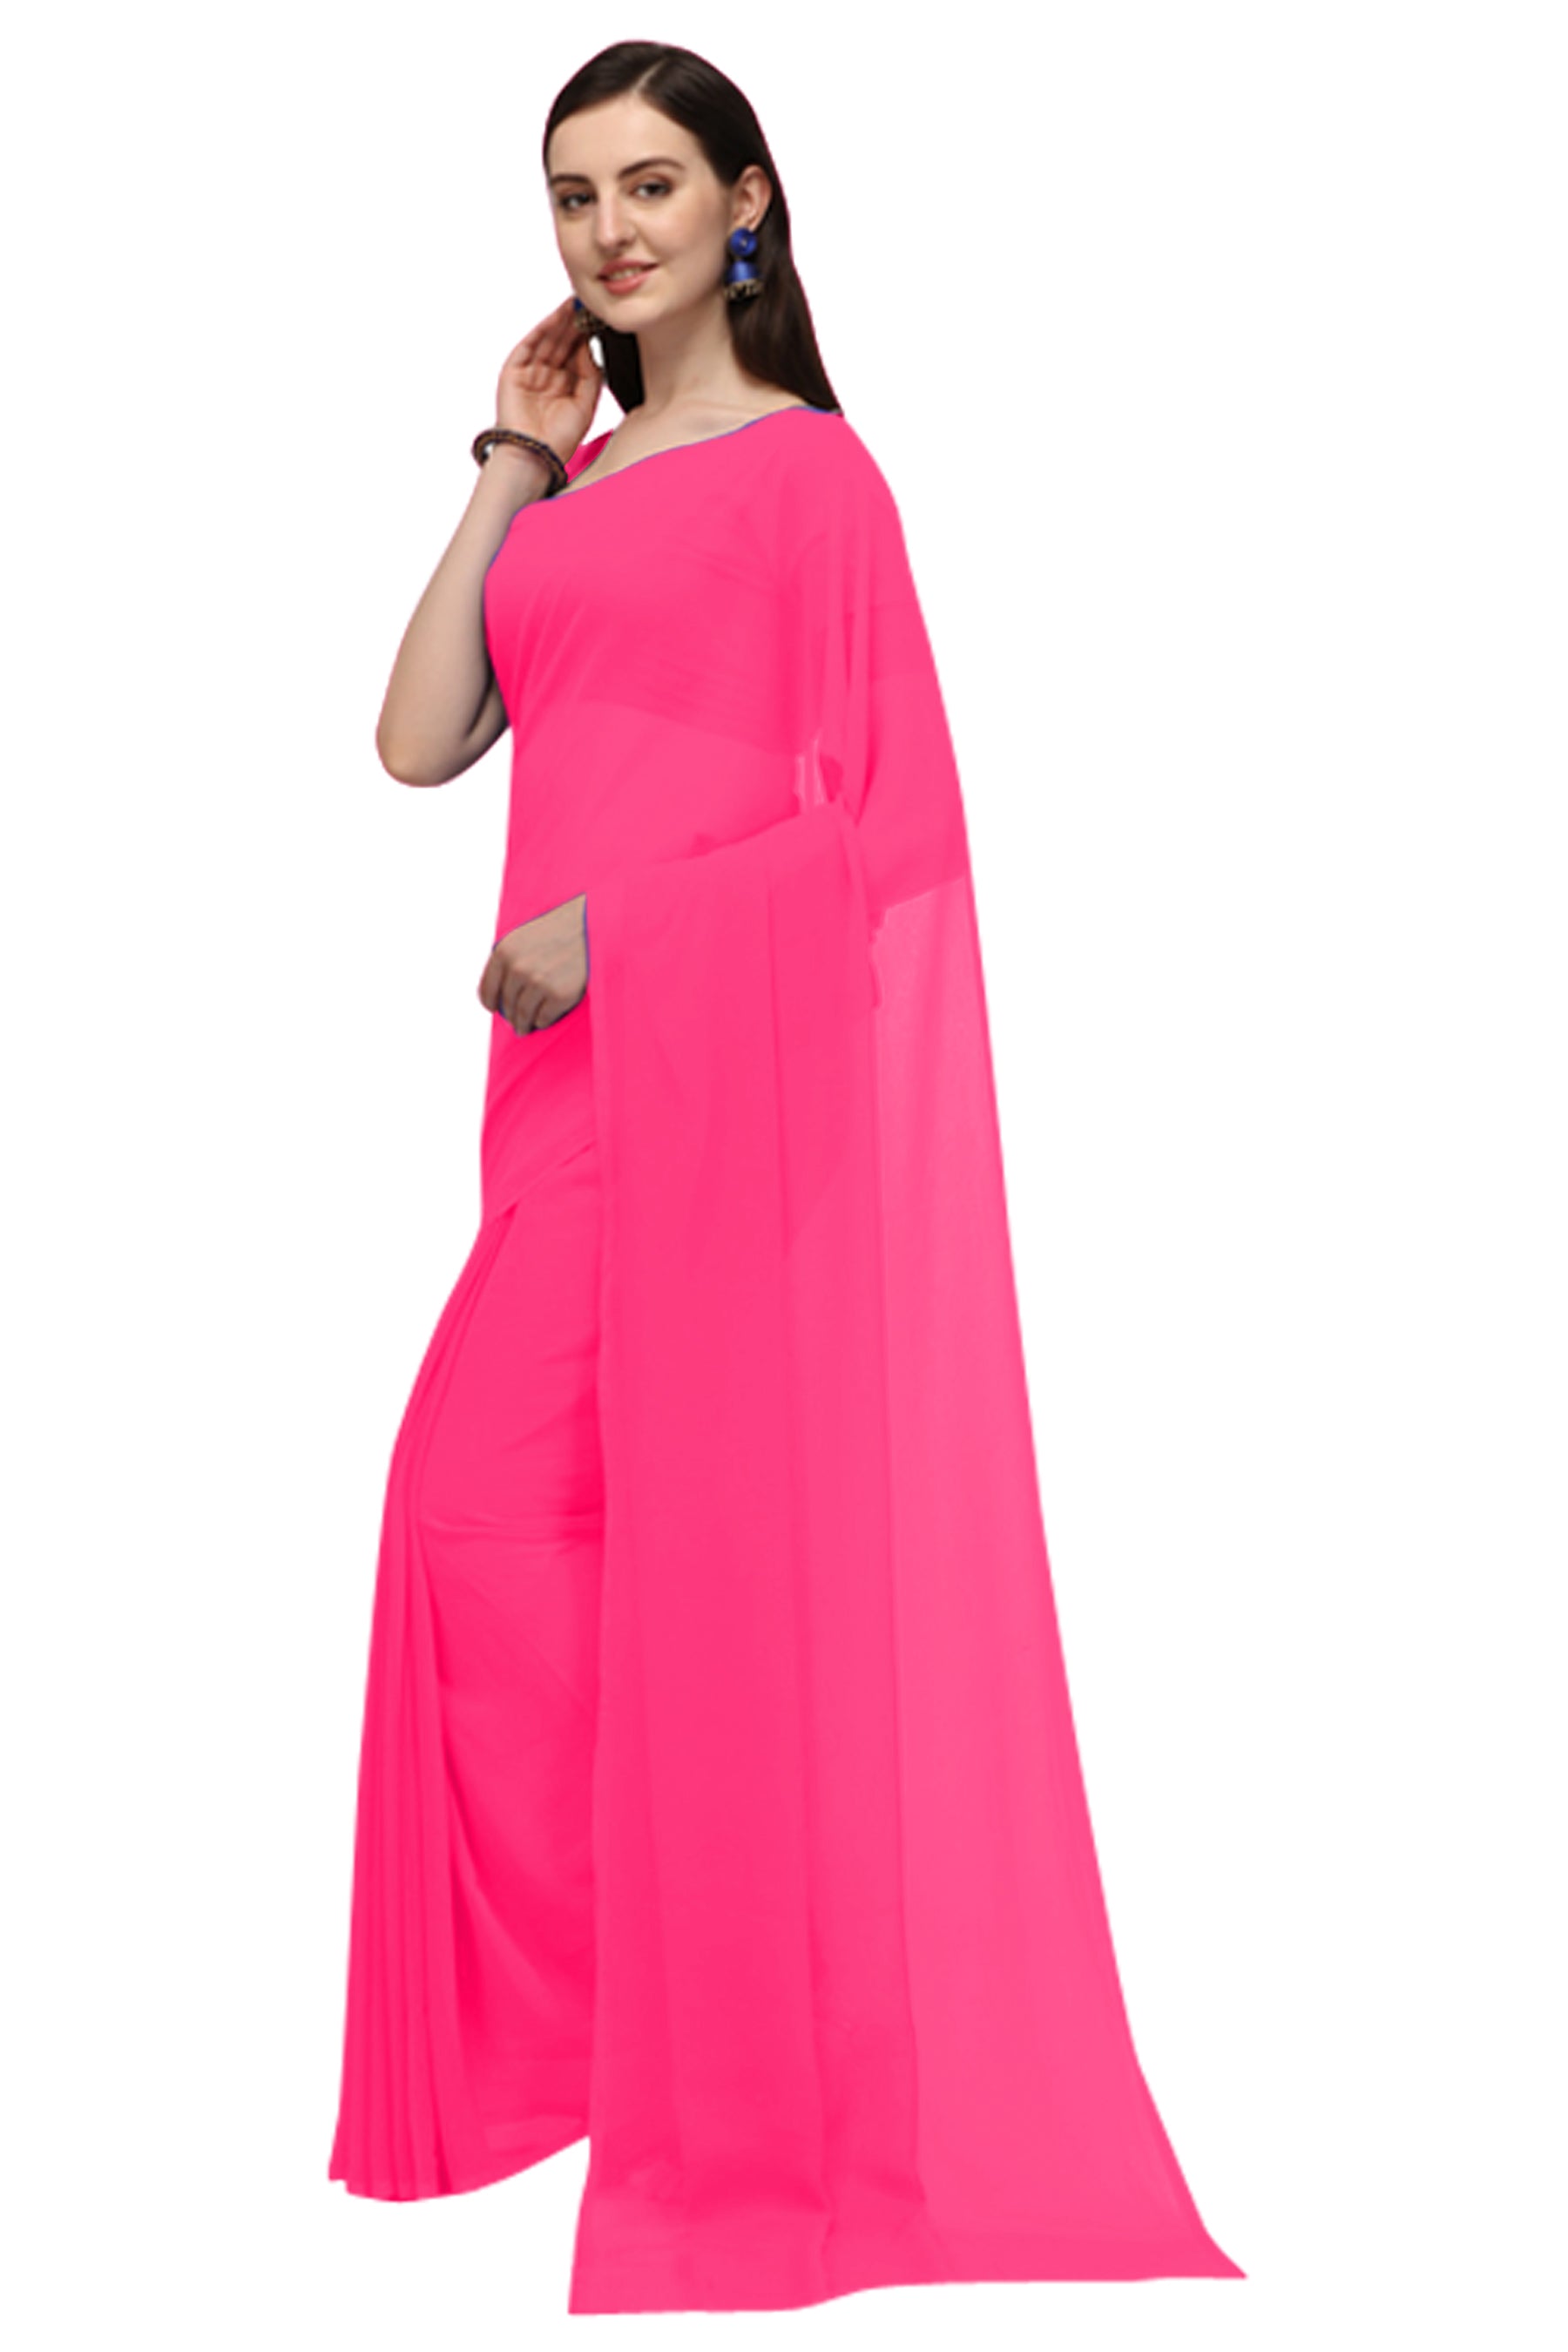 Women's Plain Woven Daily Wear  Formal Georgette Sari With Blouse Piece (Pink) - NIMIDHYA